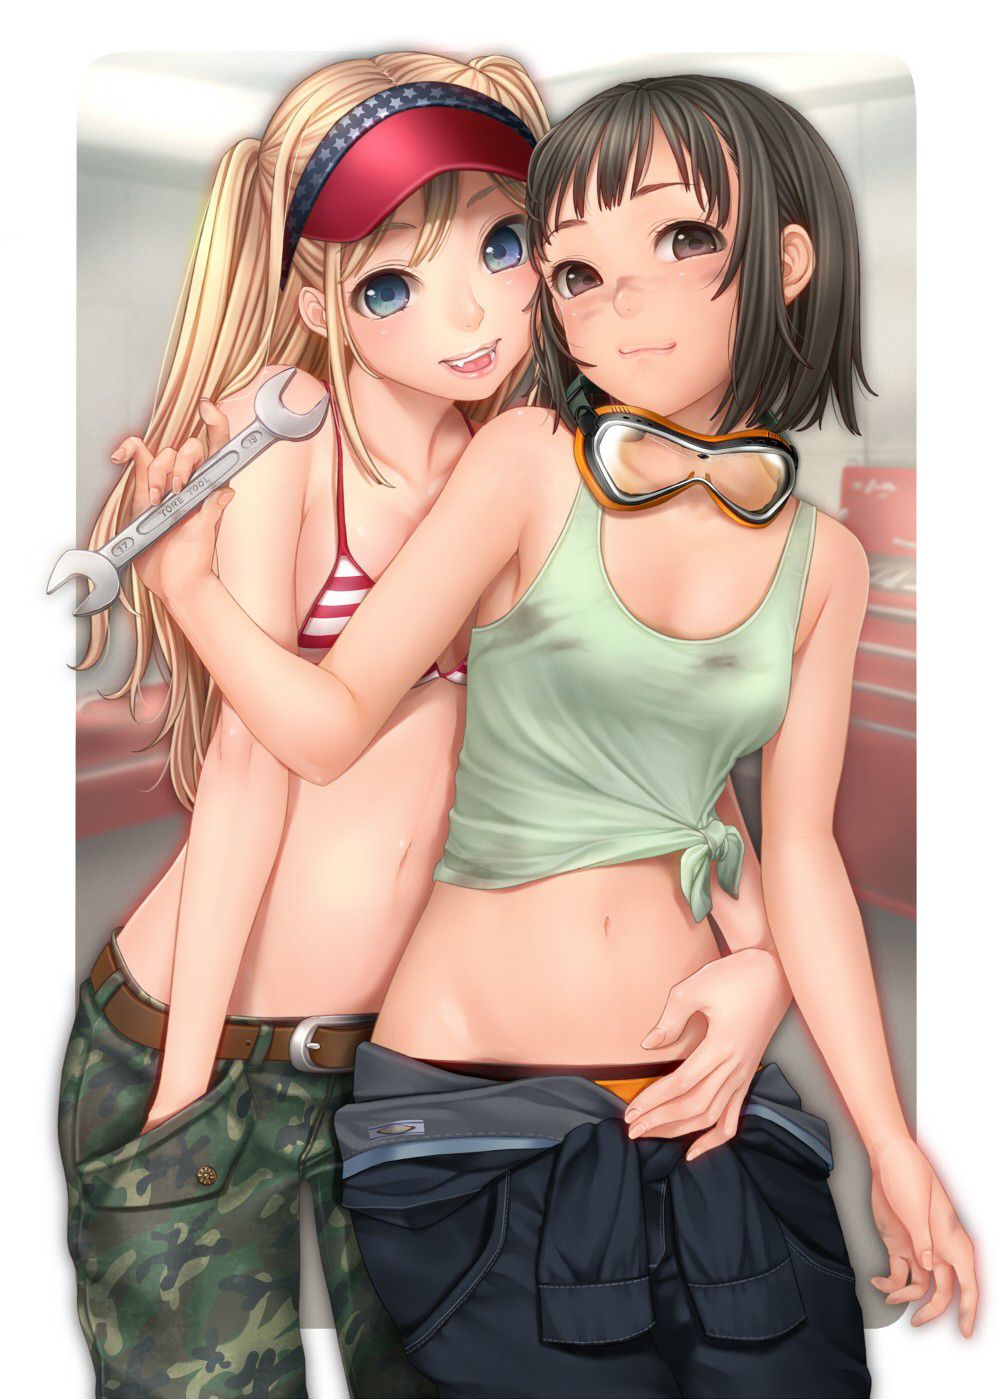 Picture is good and the girls are cute and sexy, erotic image of the secondary's best guess? Vol.5 25